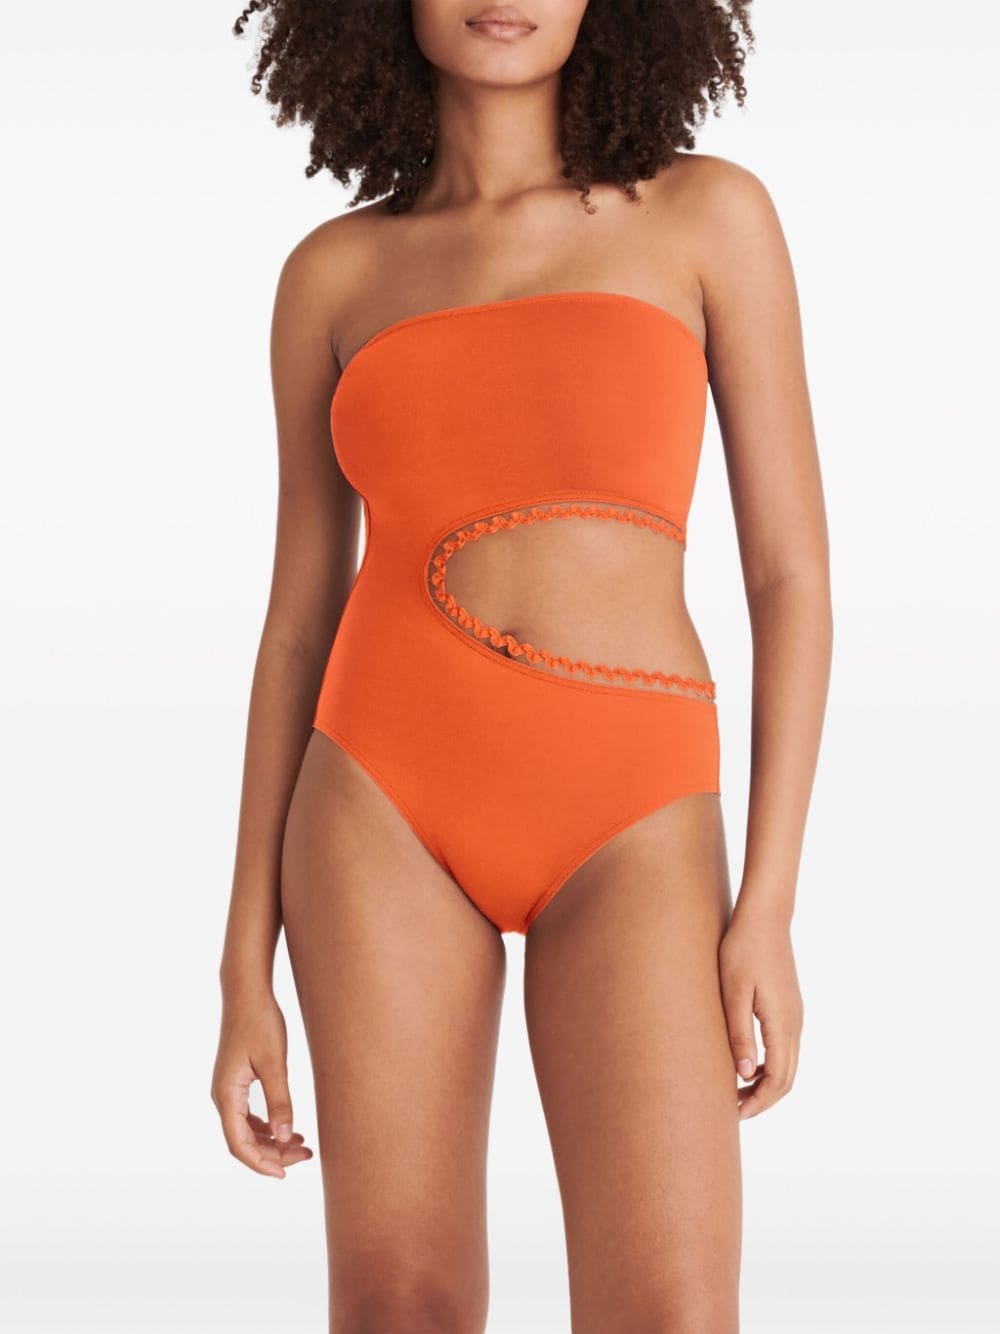 Dancing one-piece strapless swimsuit - 4